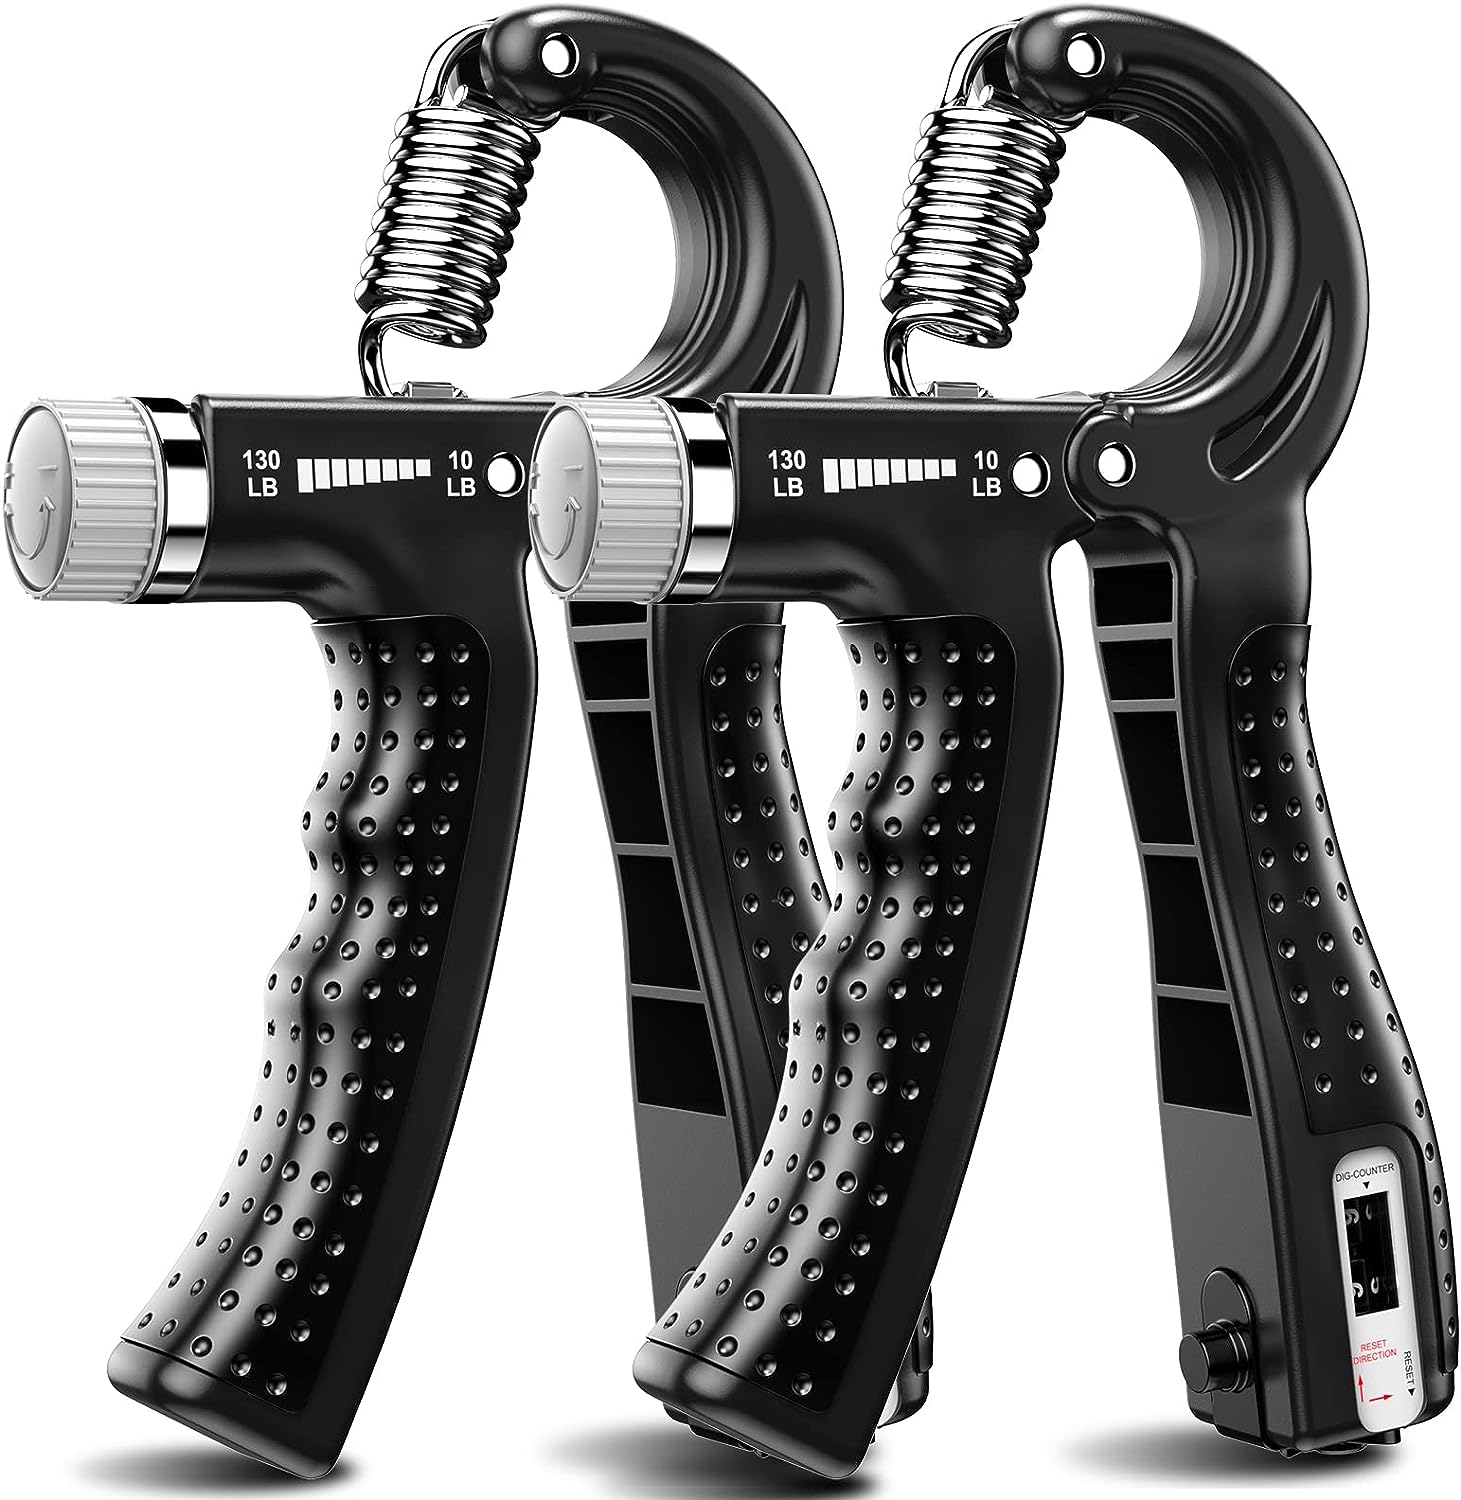 Read more about the article KDG Hand Grip Strengthener Review